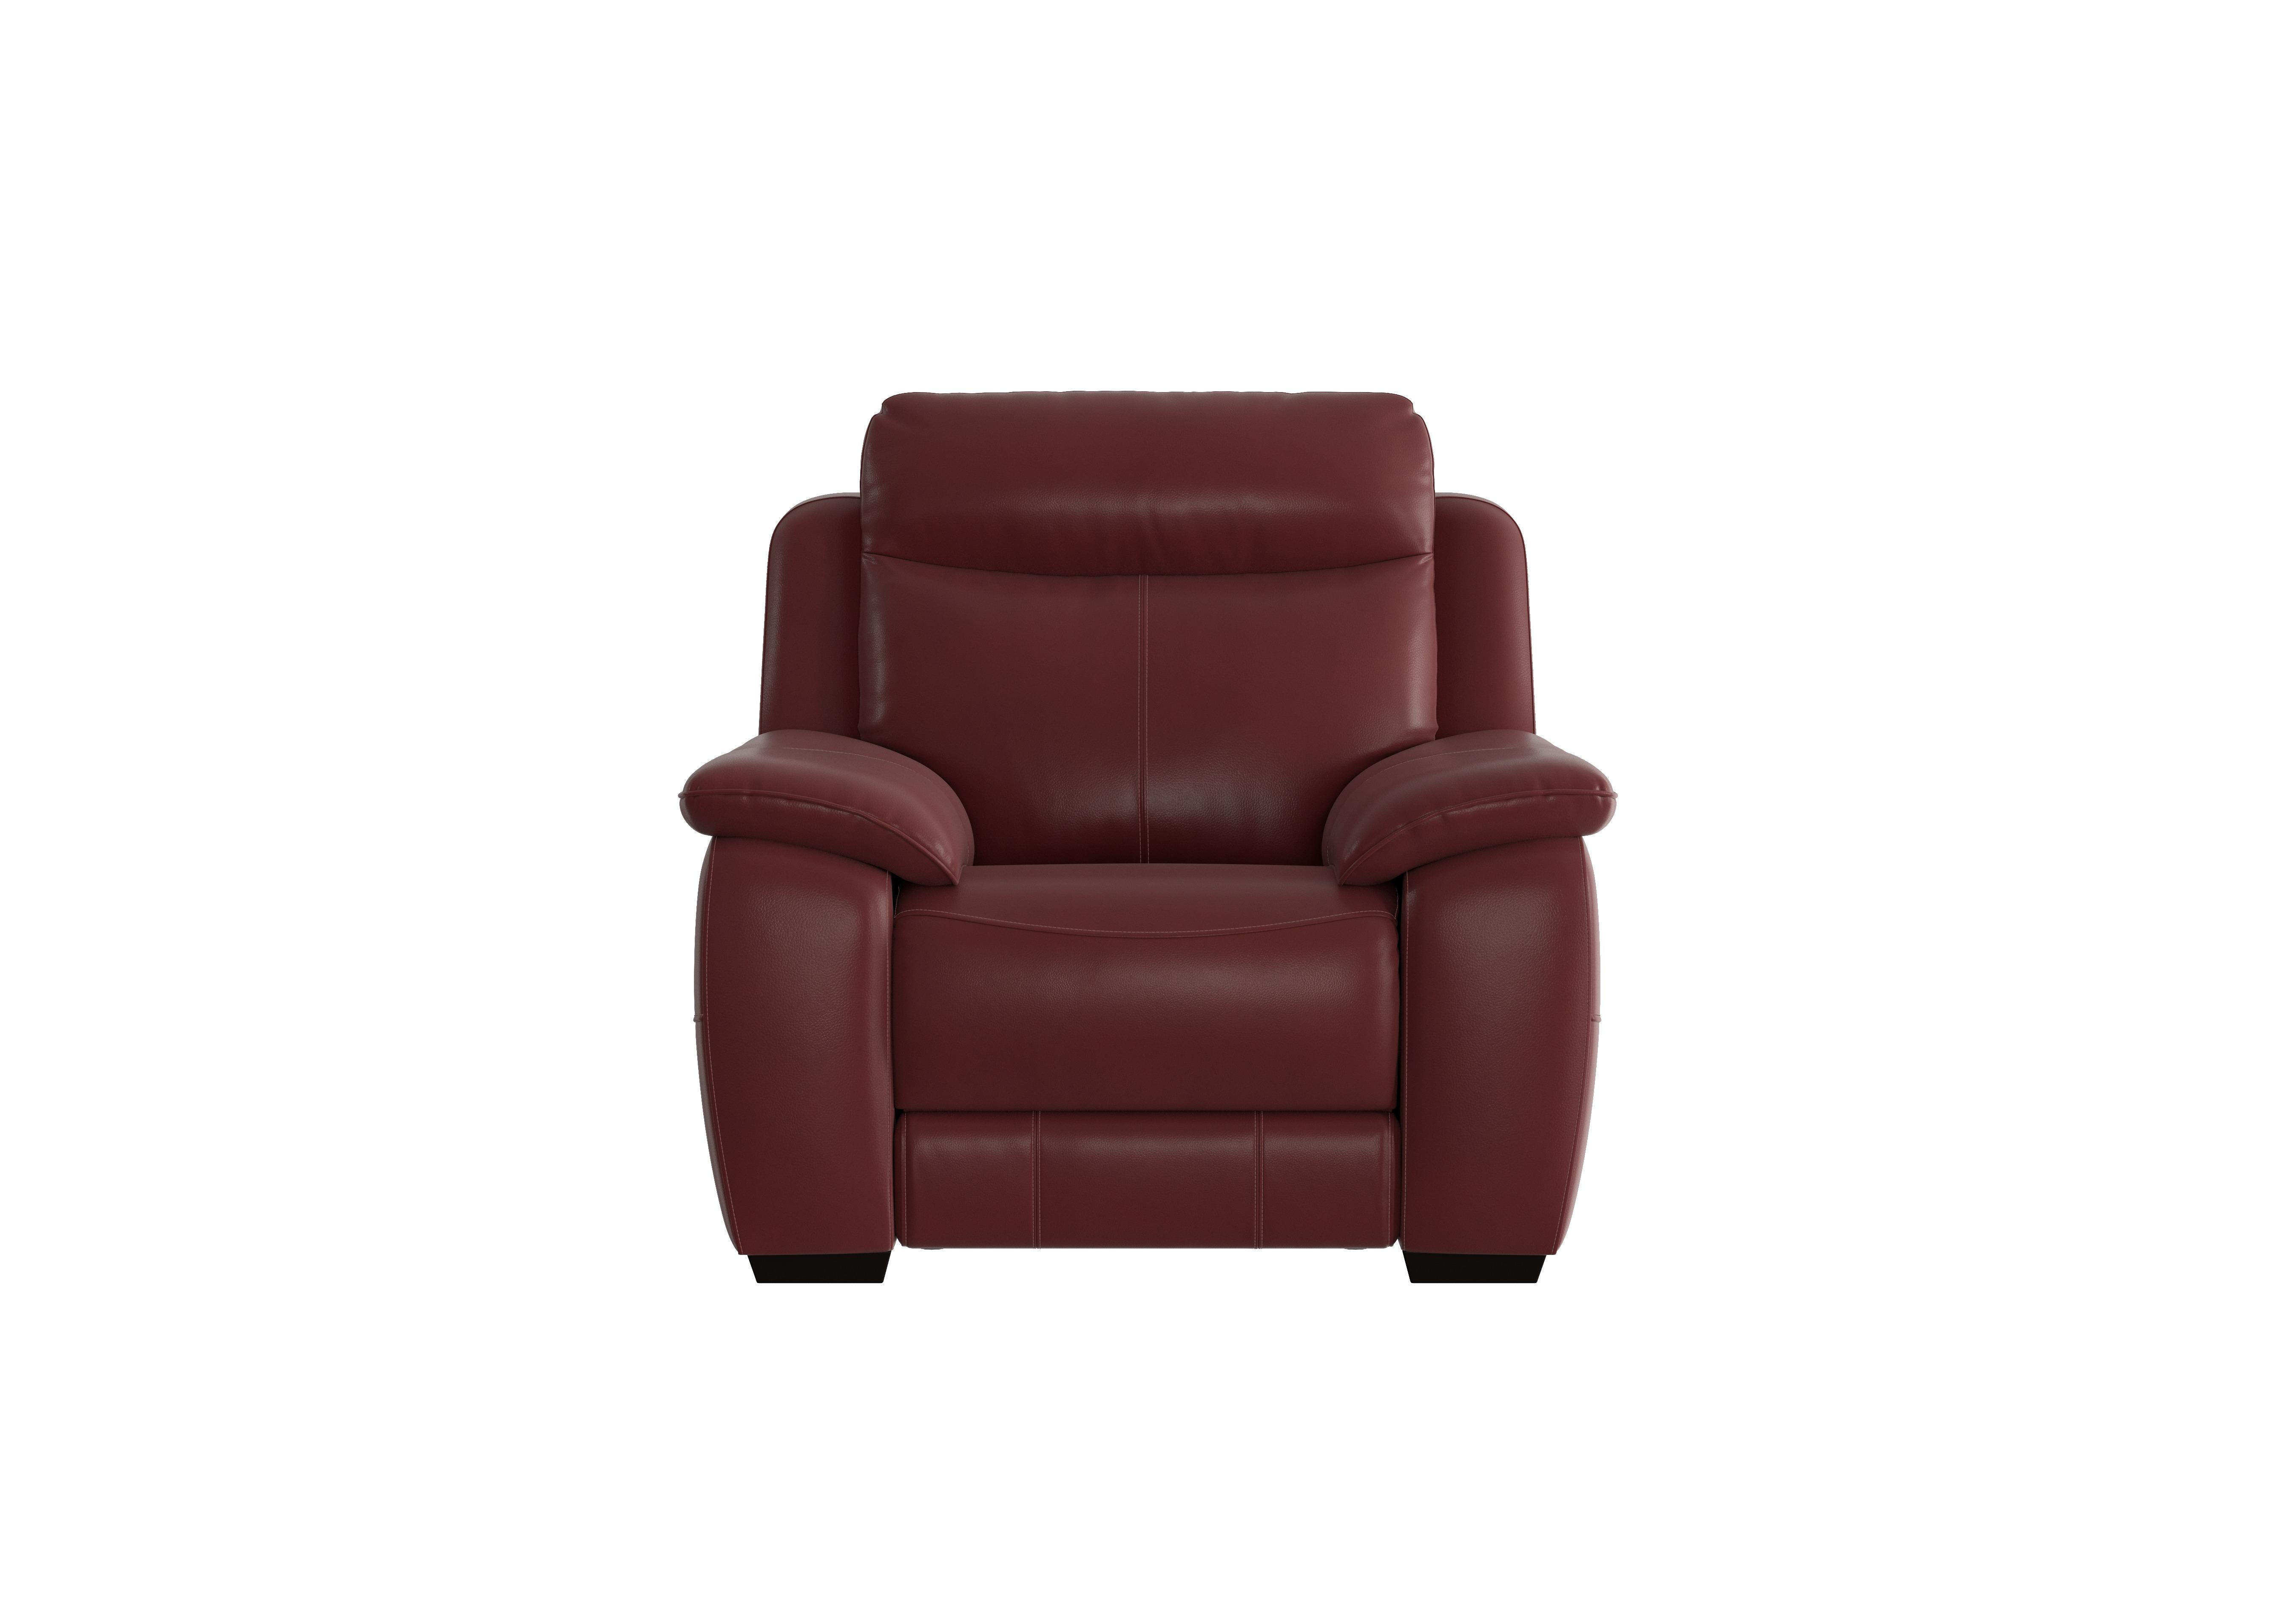 Starlight Express Leather Power Armchair with Power Headrest in Bv-035c Deep Red on Furniture Village